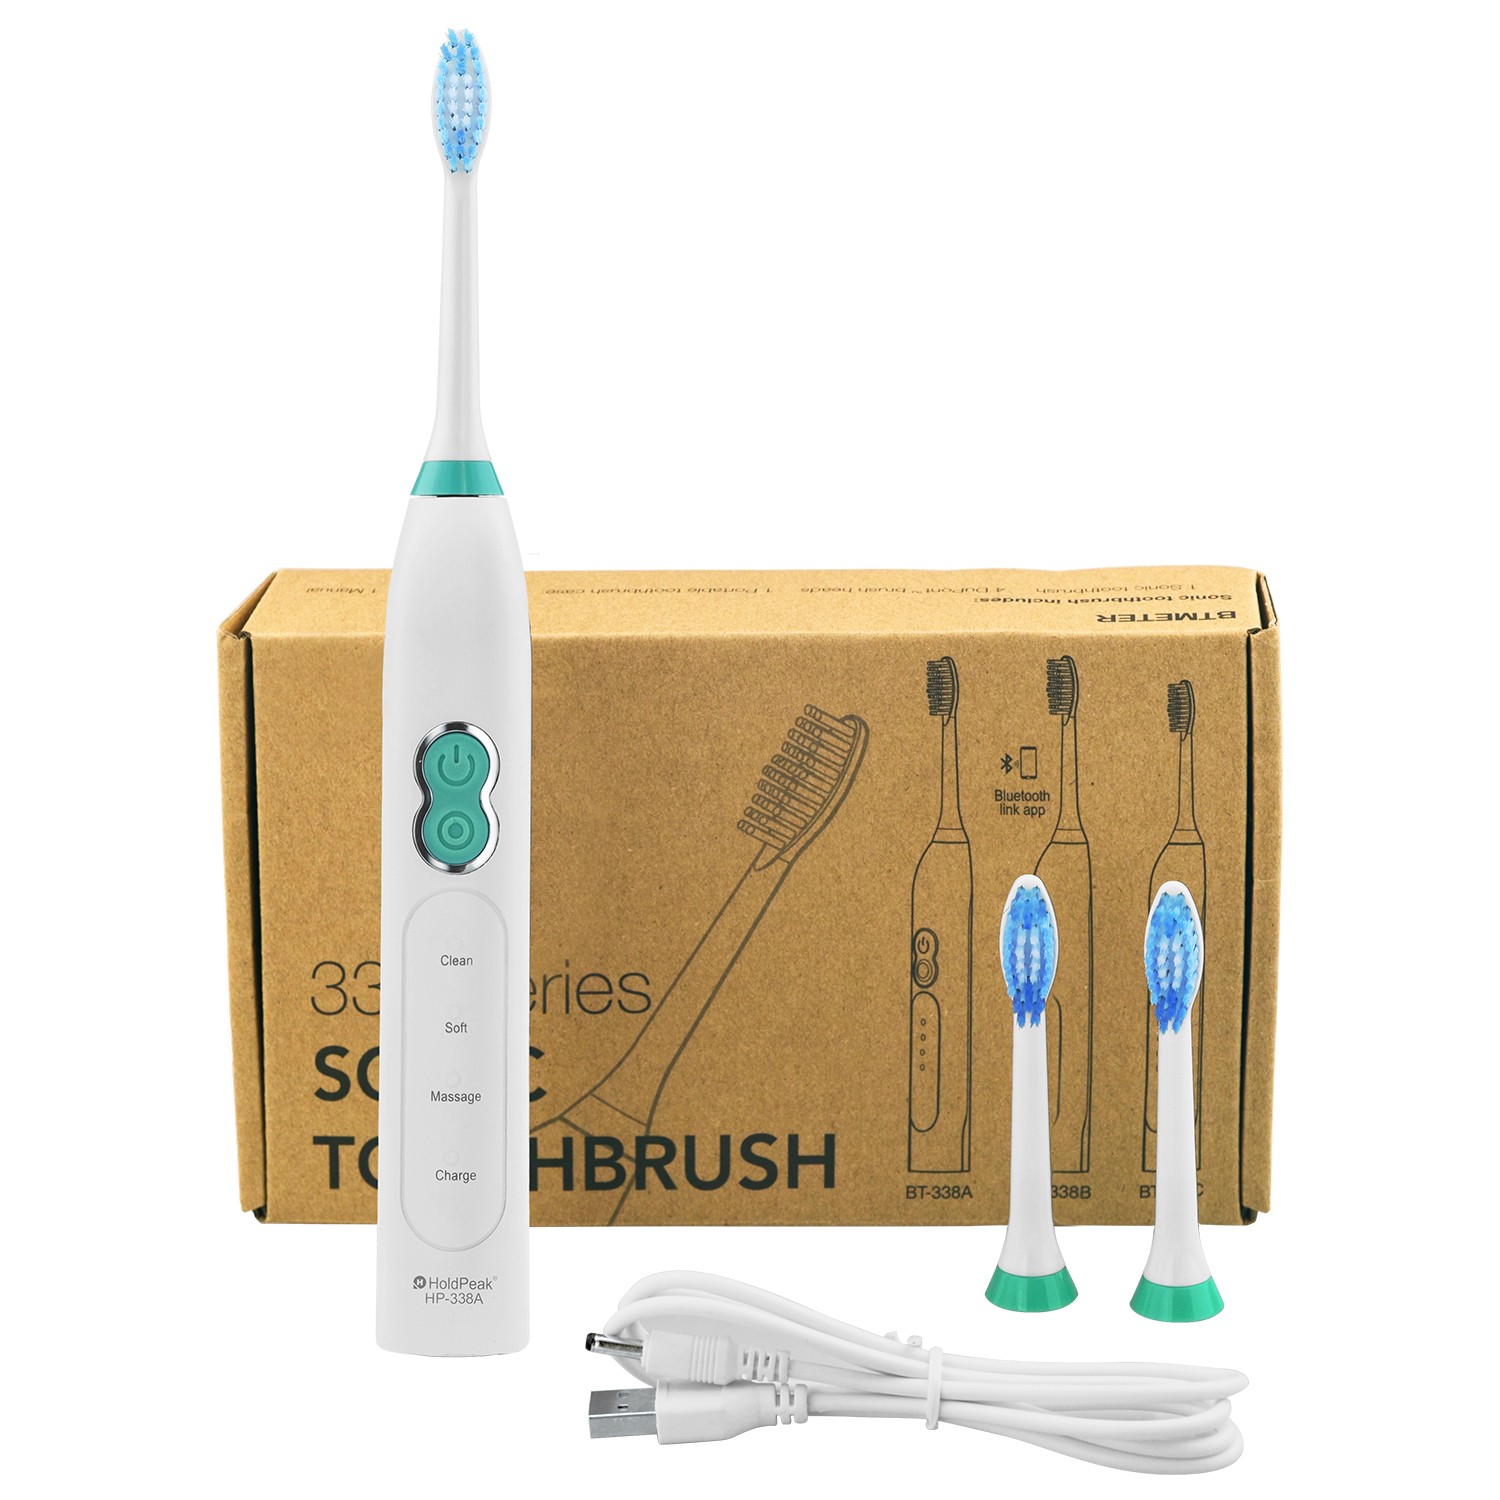 HoldPeak sonic toothbrush Suppliers for cleaning